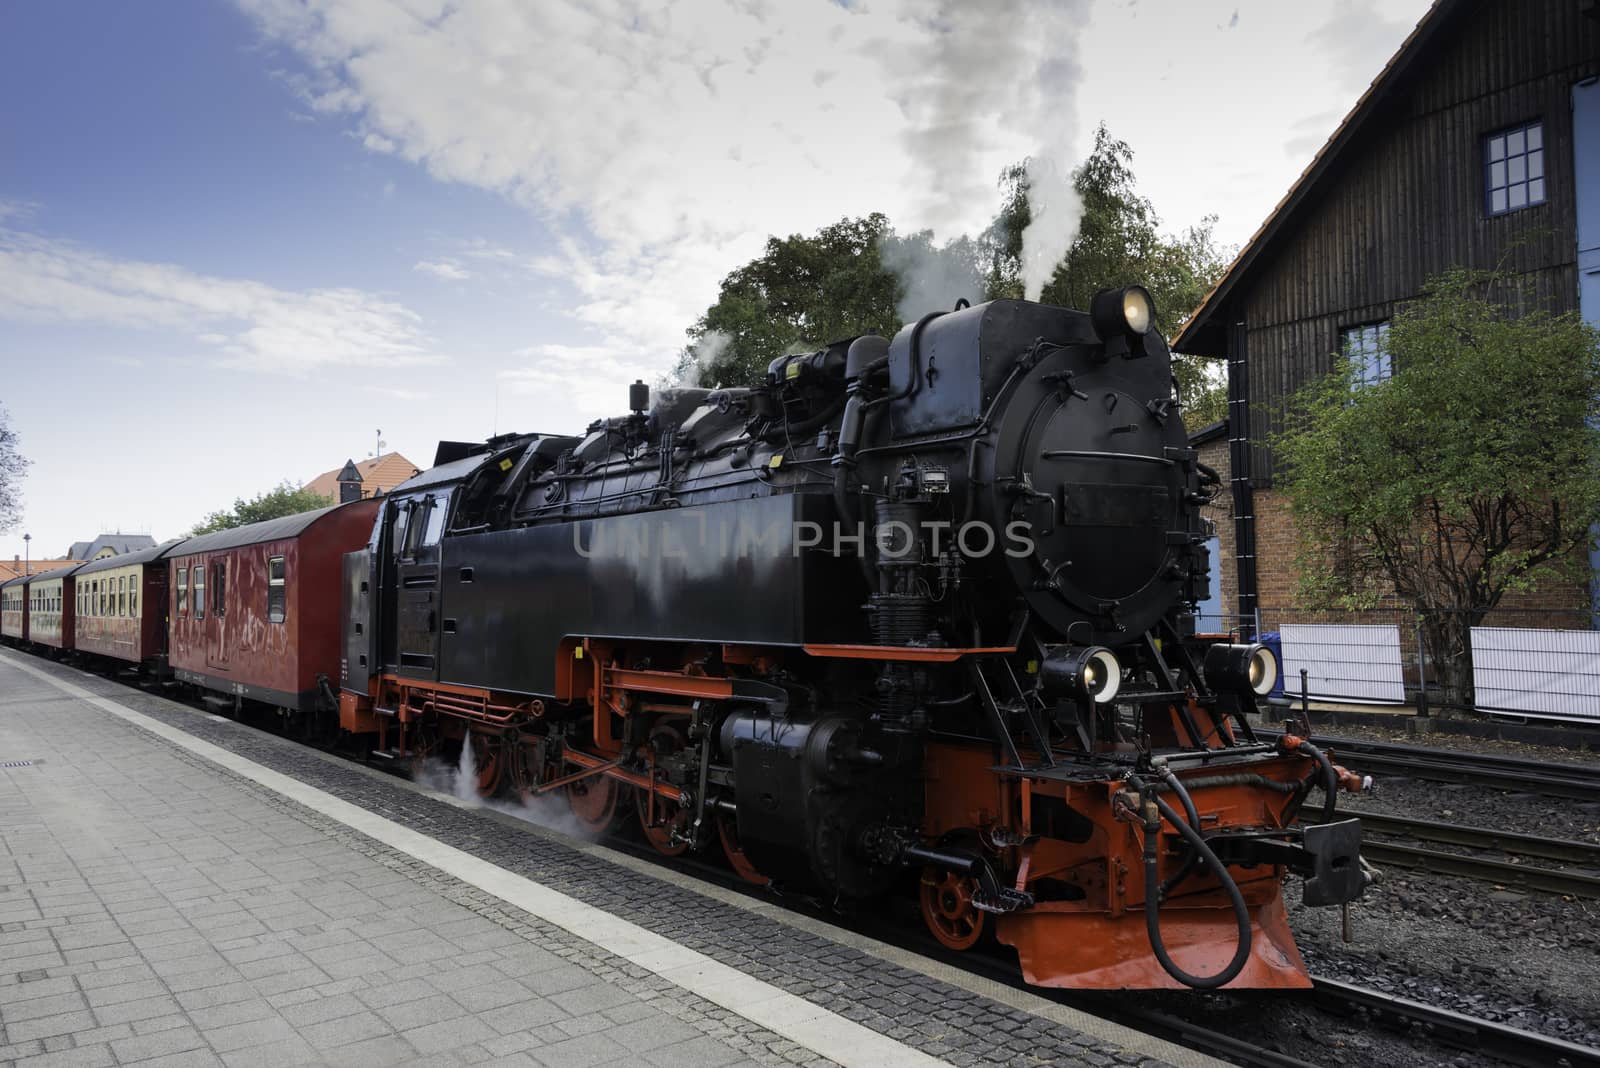 old  steam train in germany by compuinfoto